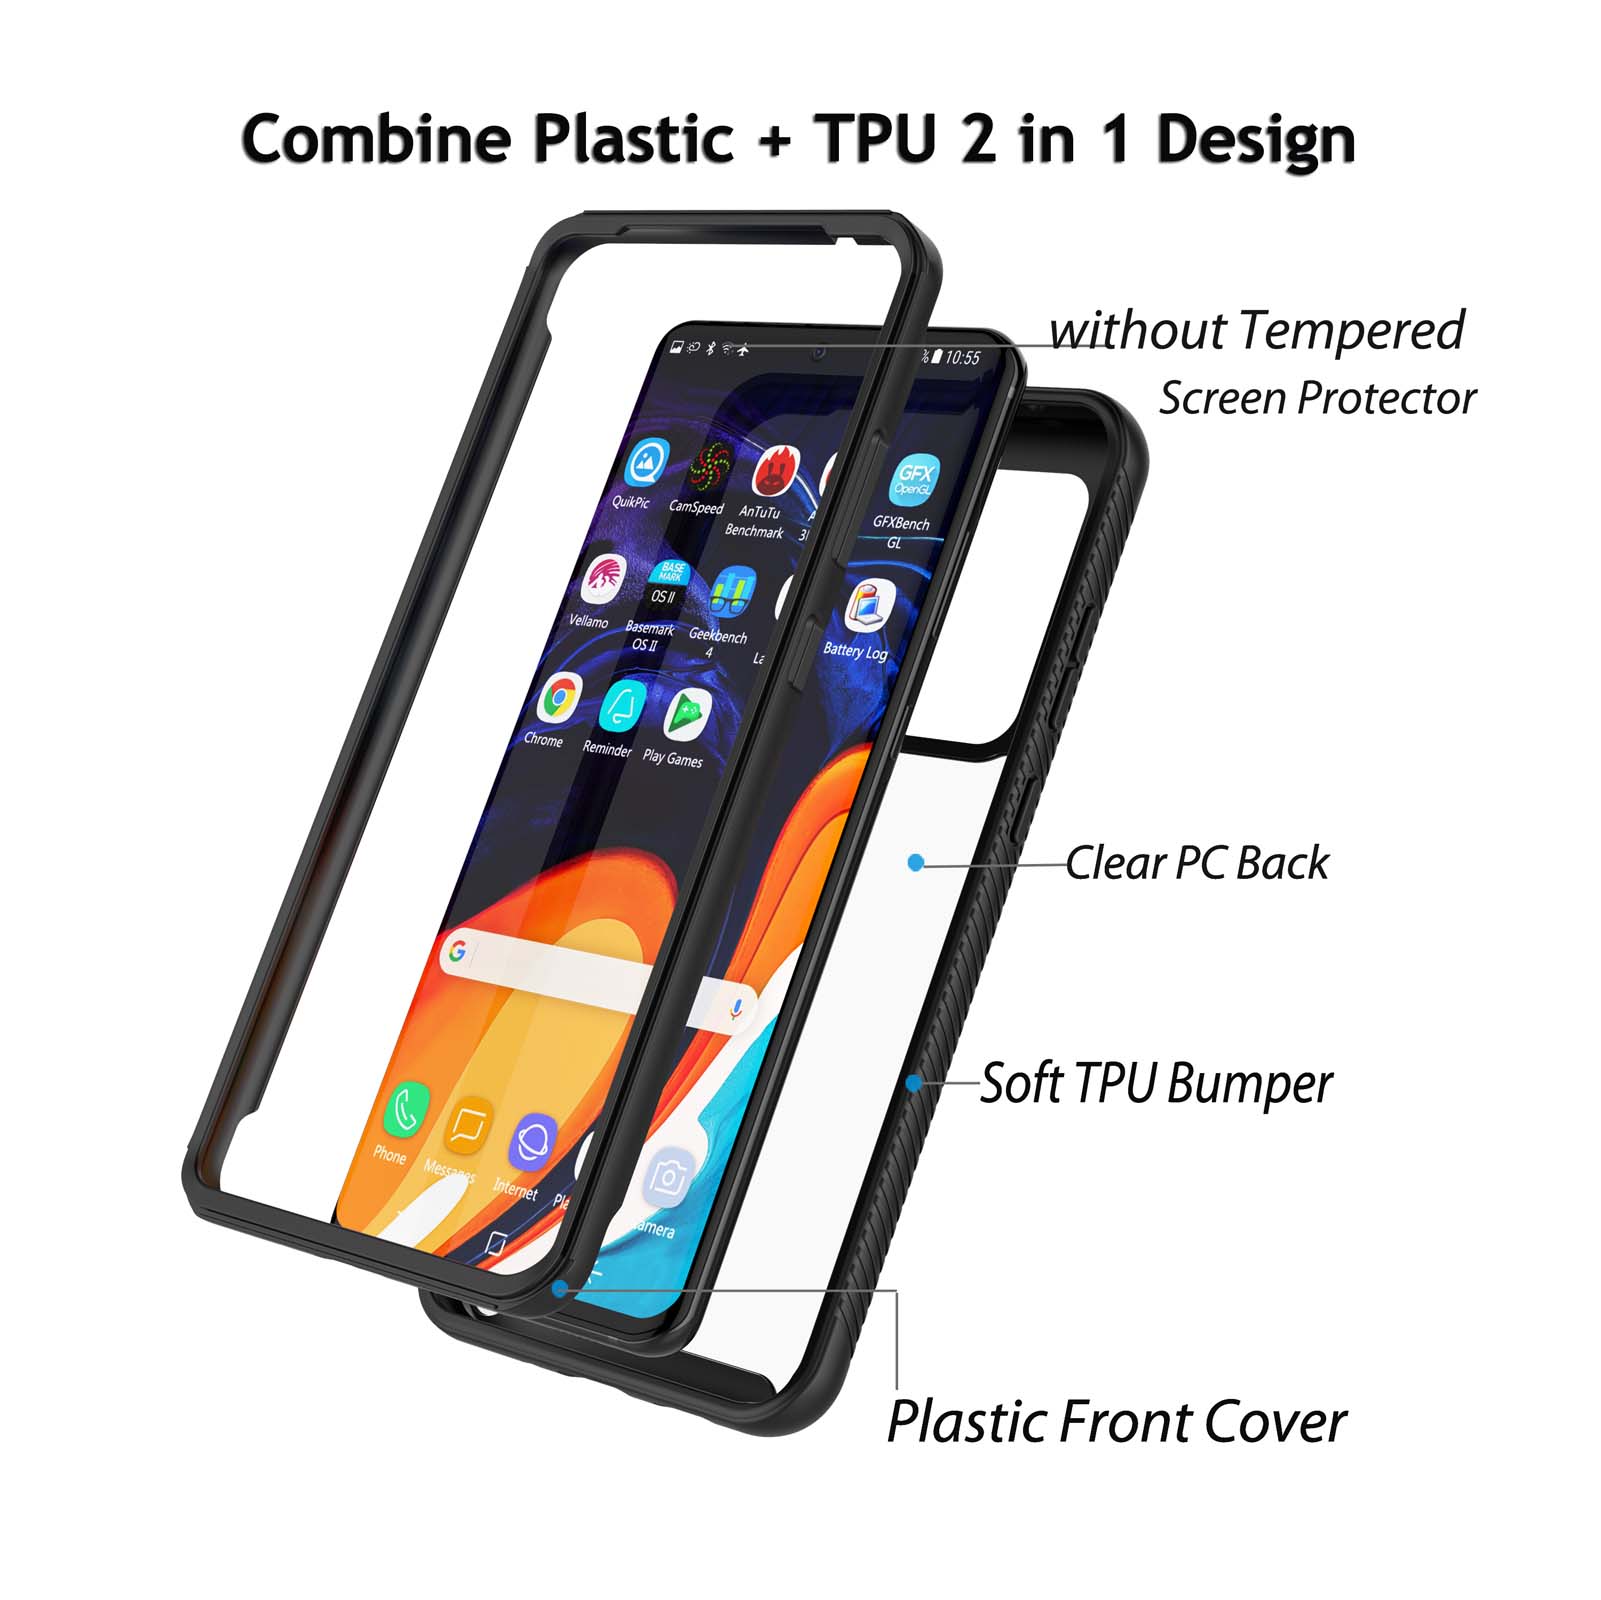 Njjex for Samsung Galaxy S20 Plus 5G S20+ S20 S20 Ultra 5G 2020 Cases Slim, Njjex Full-Body Rugged Transparent Clear Back Bumper Galaxy S20+ S20 Plus S20 Ultra Phone Case - image 3 of 8